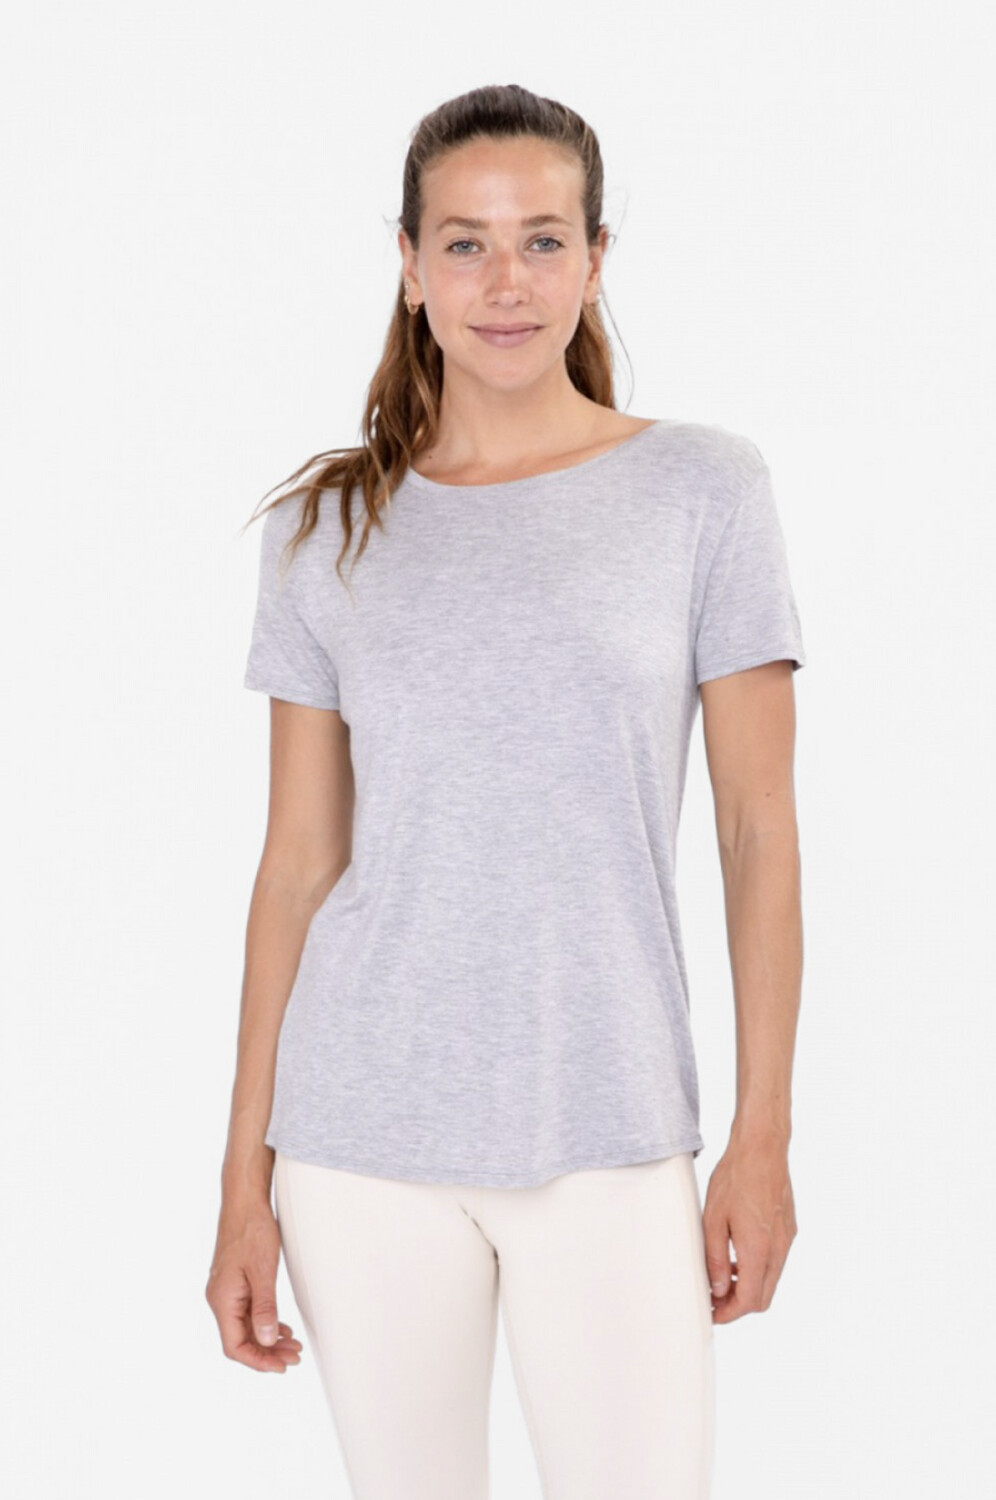 Short Sleeve High-Low Tee, Size: Small, Colour: Grey